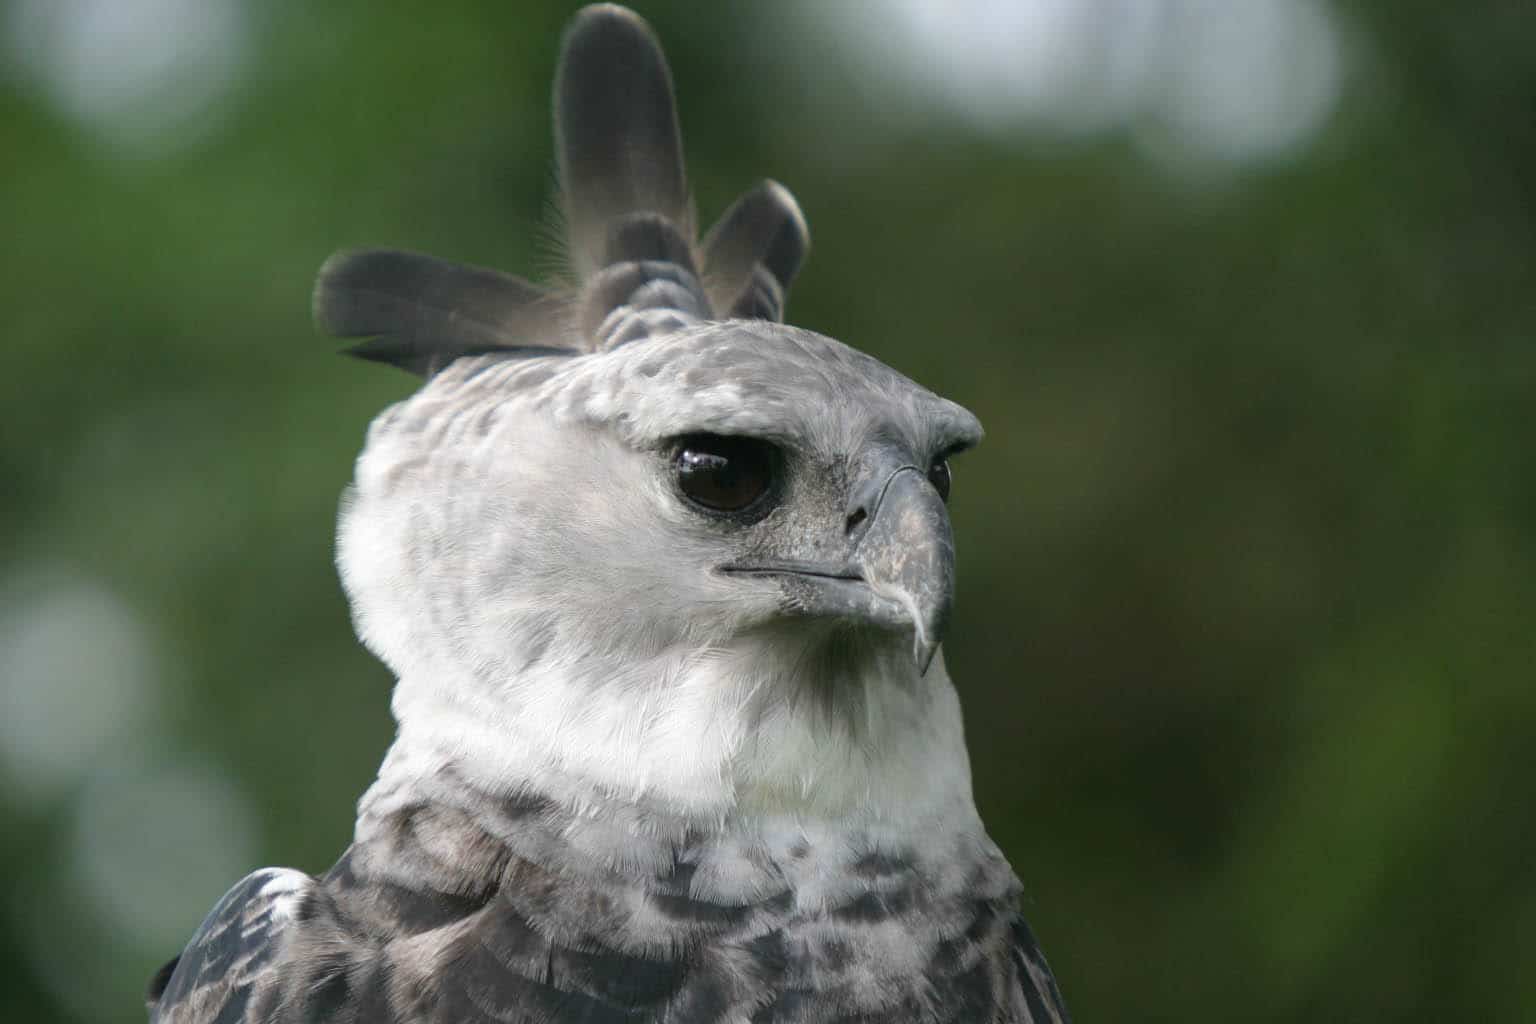 Just How Big And Powerful Is The Harpy Eagle?